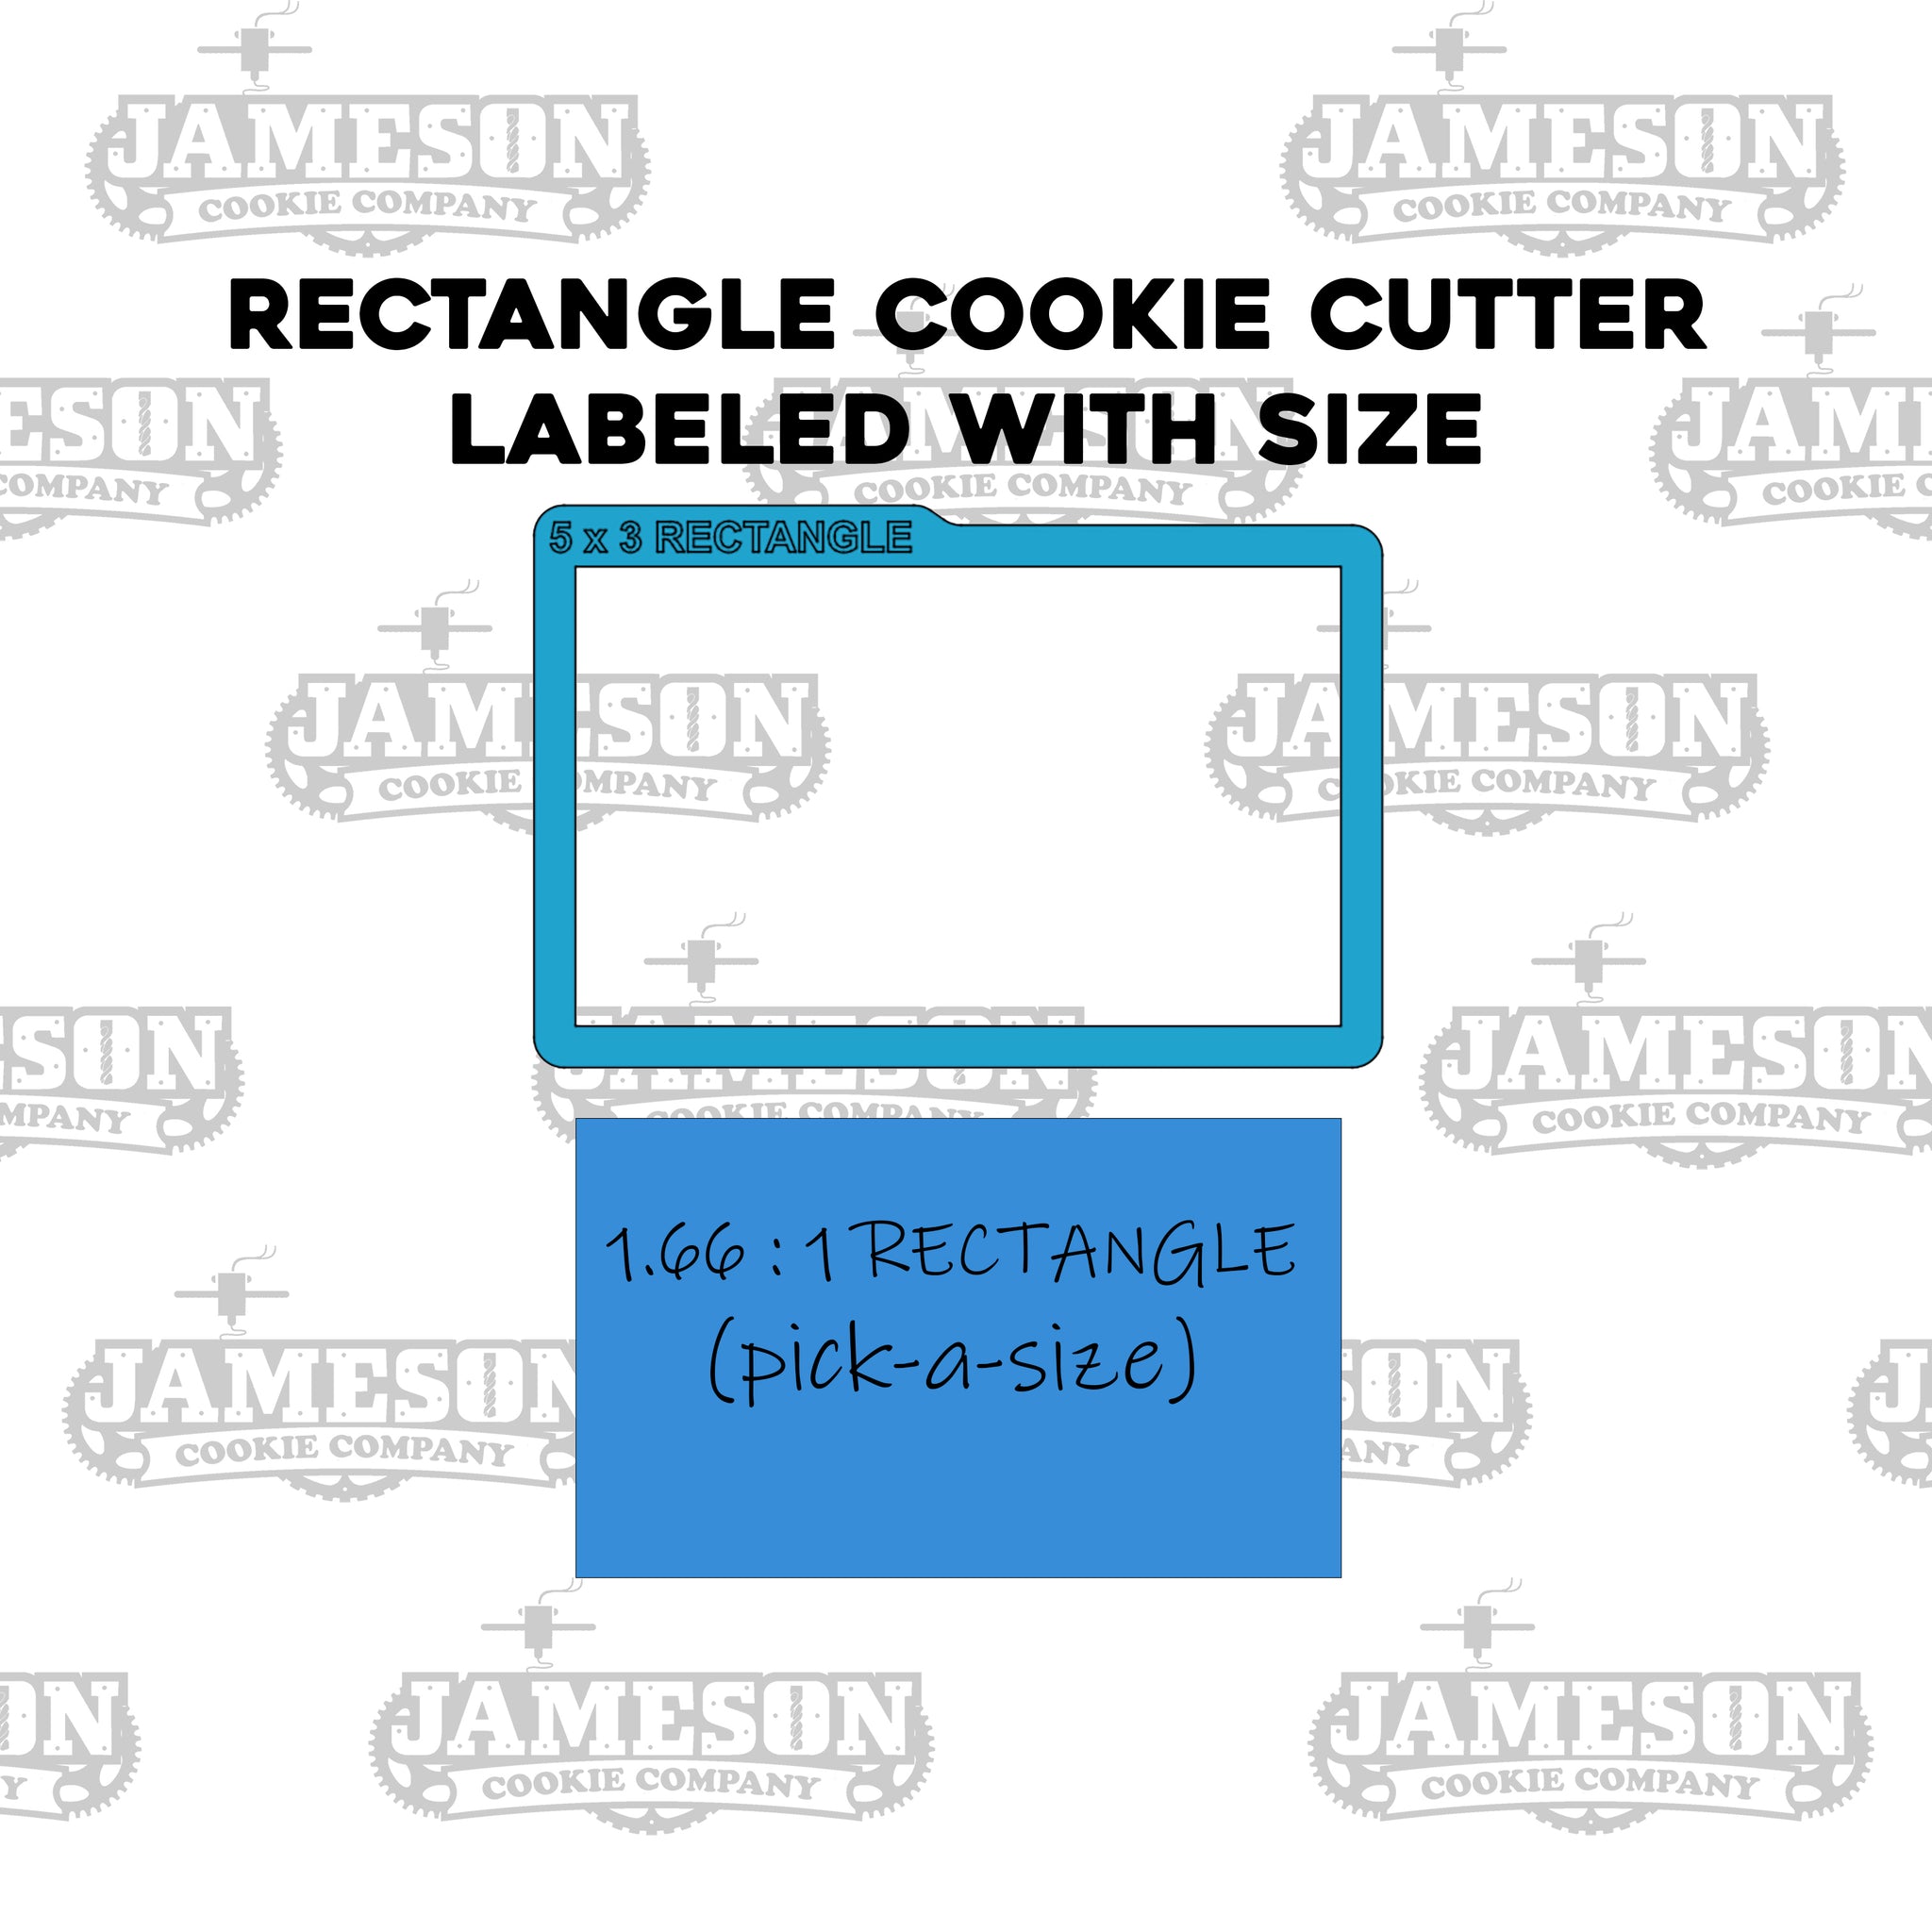 1.66 to 1 Ratio - Rectangle Shaped Cookie Cutter